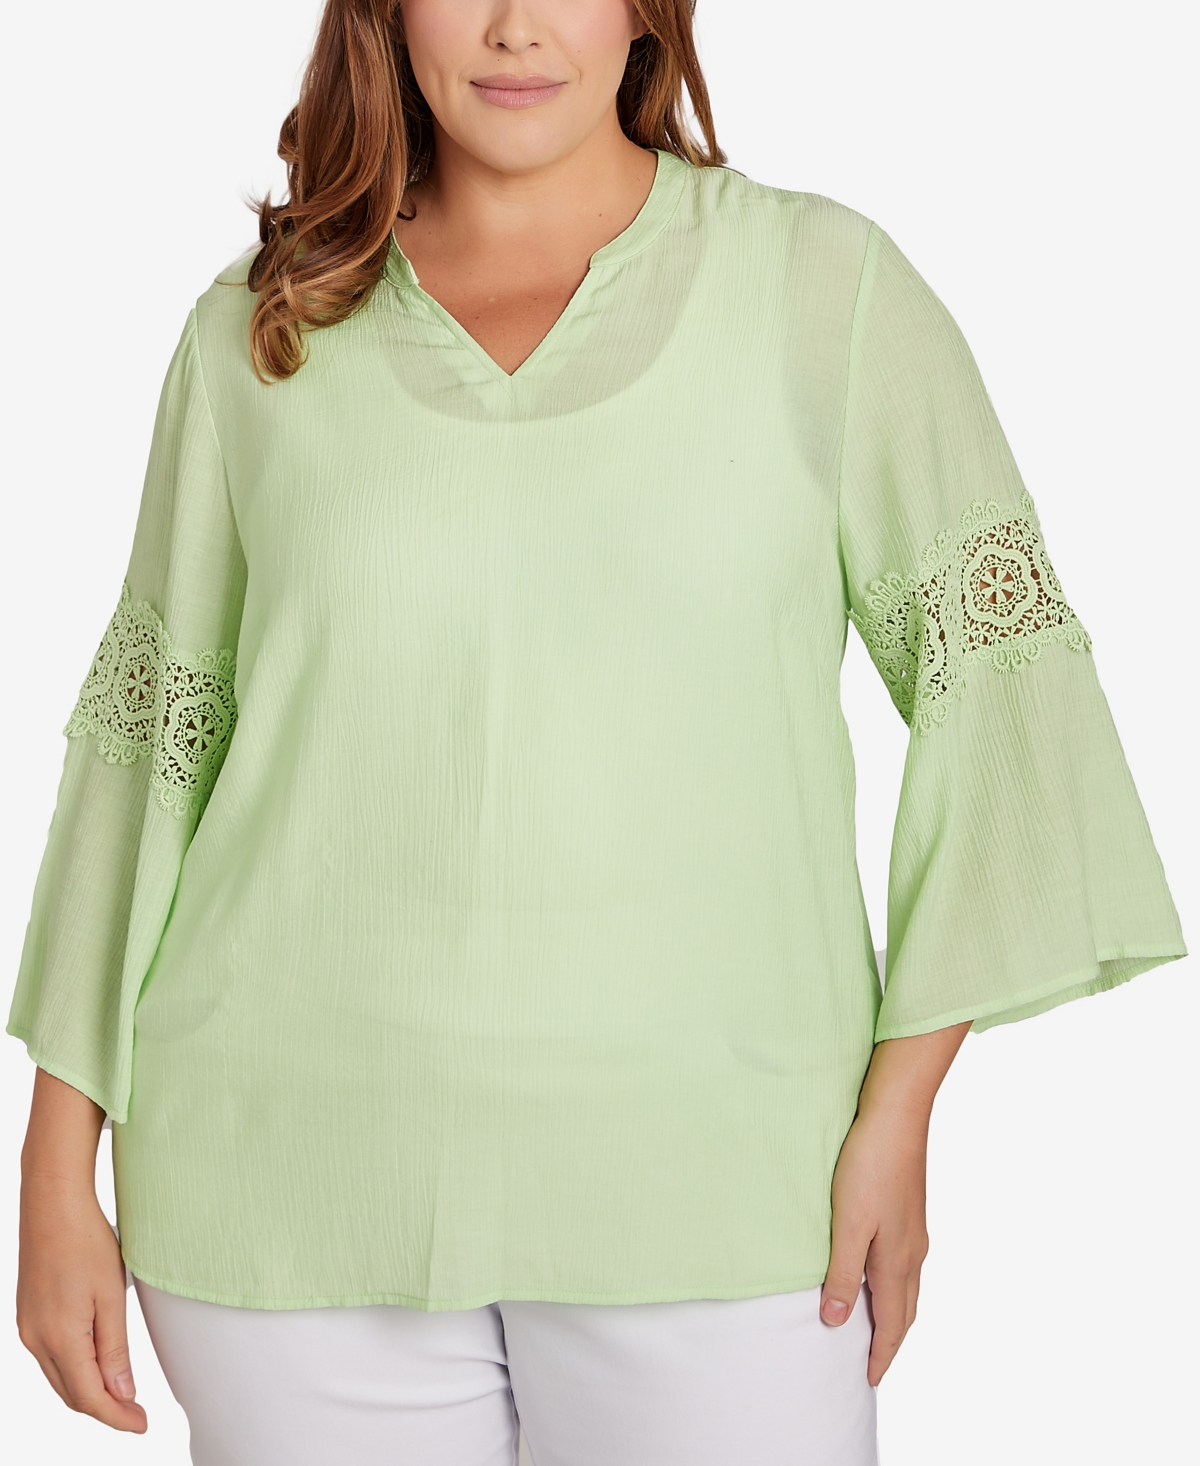 Plus Size Solid Bali Lace Top - Honeydew